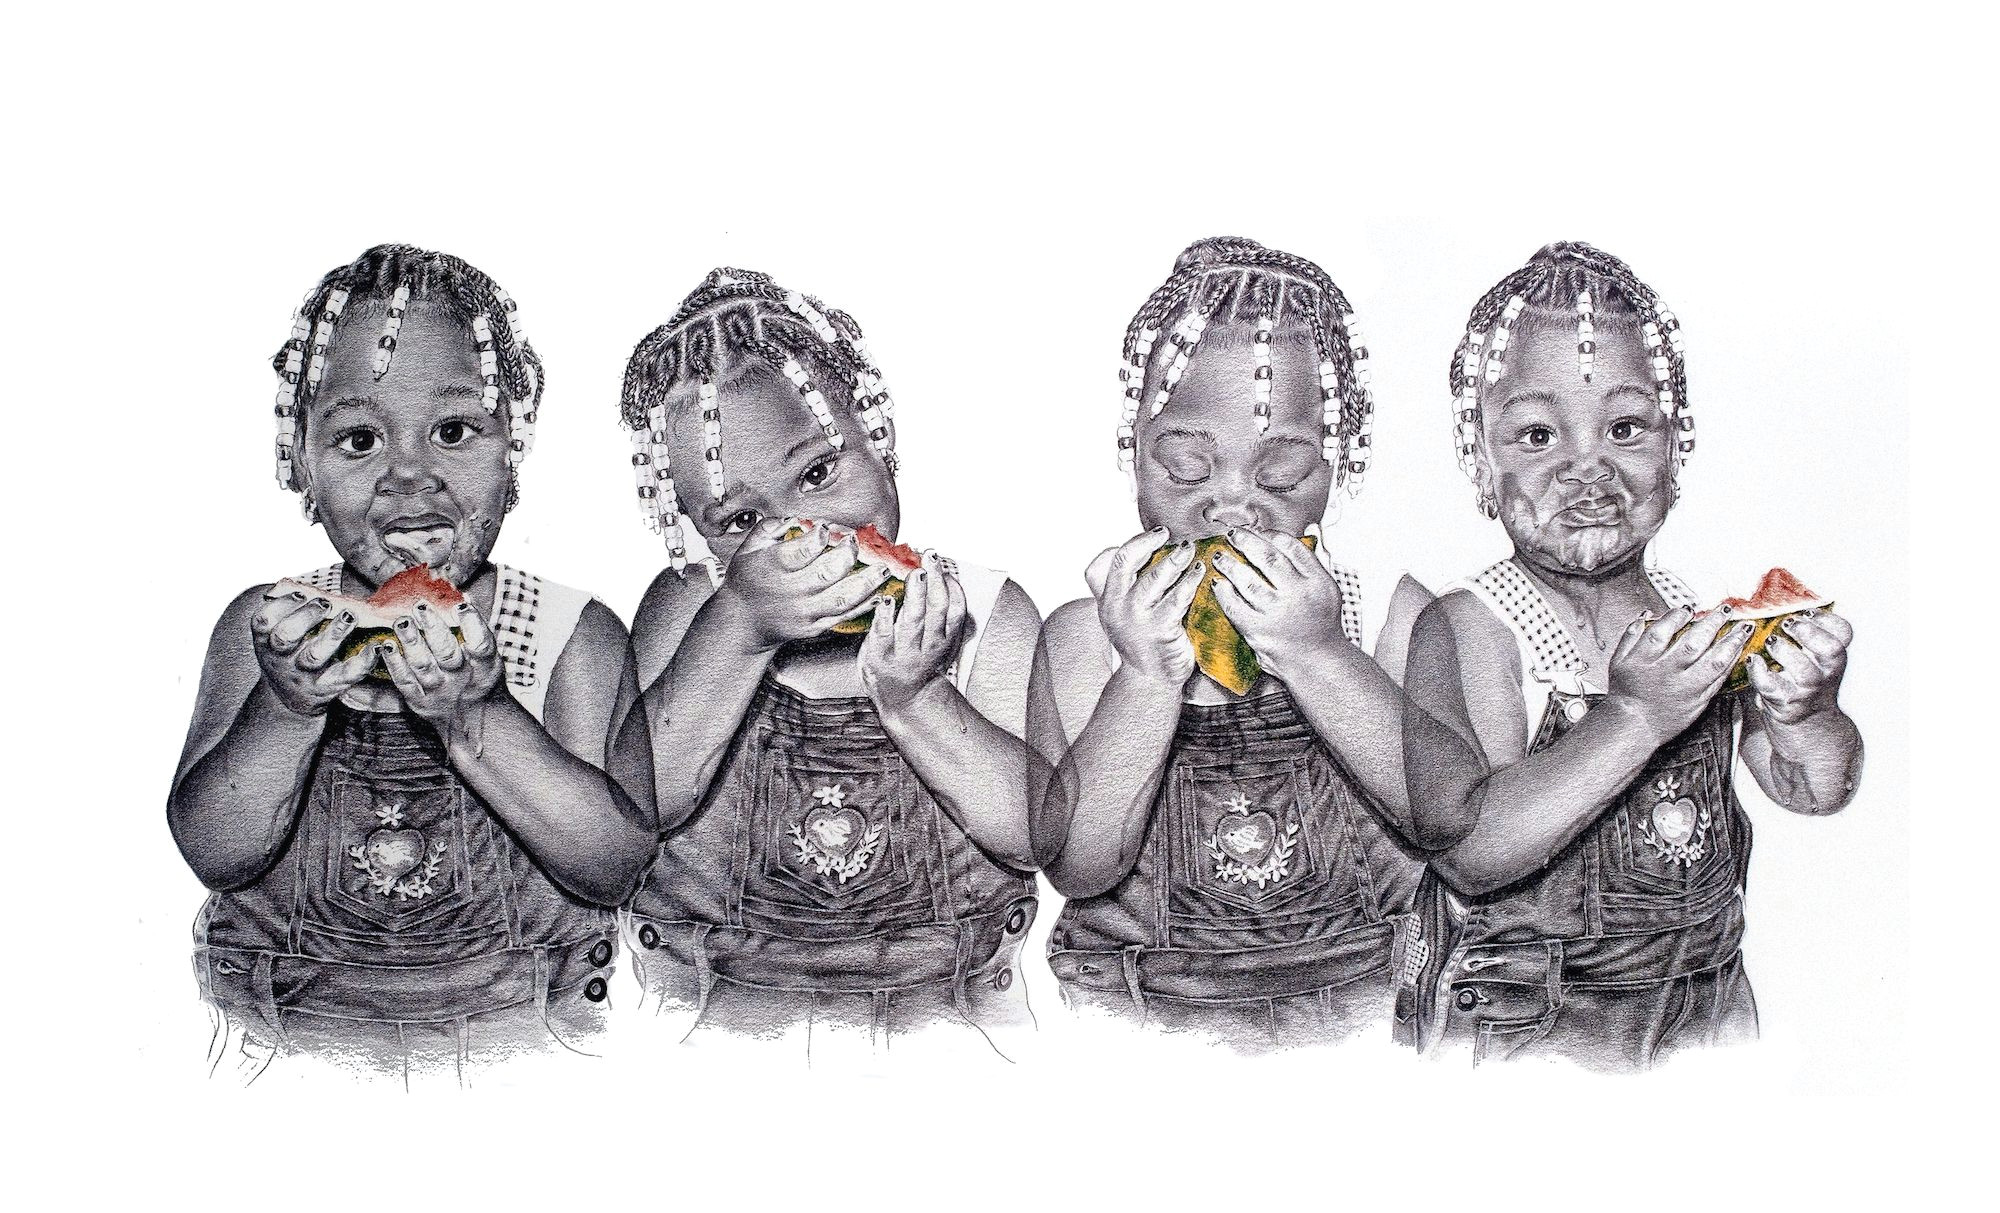 limited edition pencil drawing print of four girls eating a watermelon by world famous black artist john nelson print size 24x22